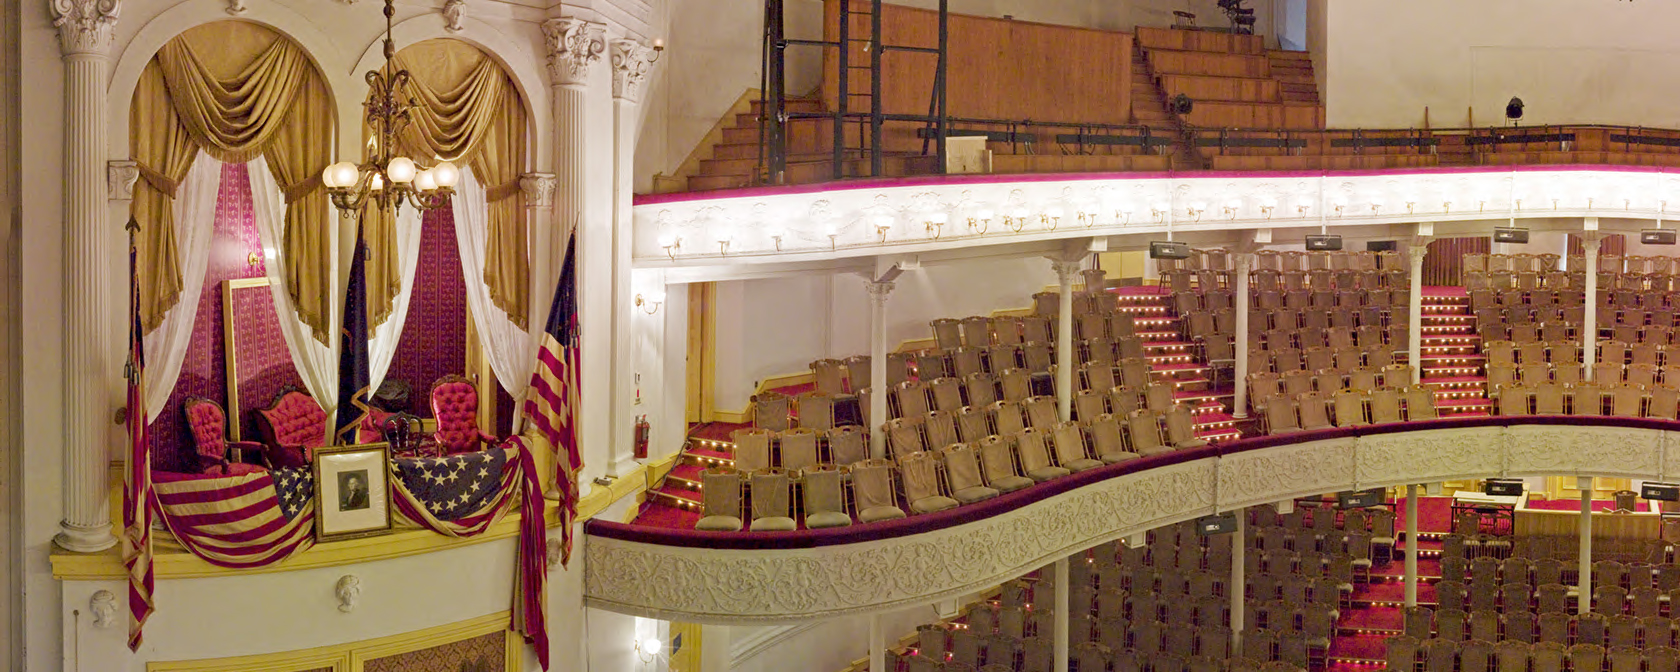 Ford's Theater Panoramic View